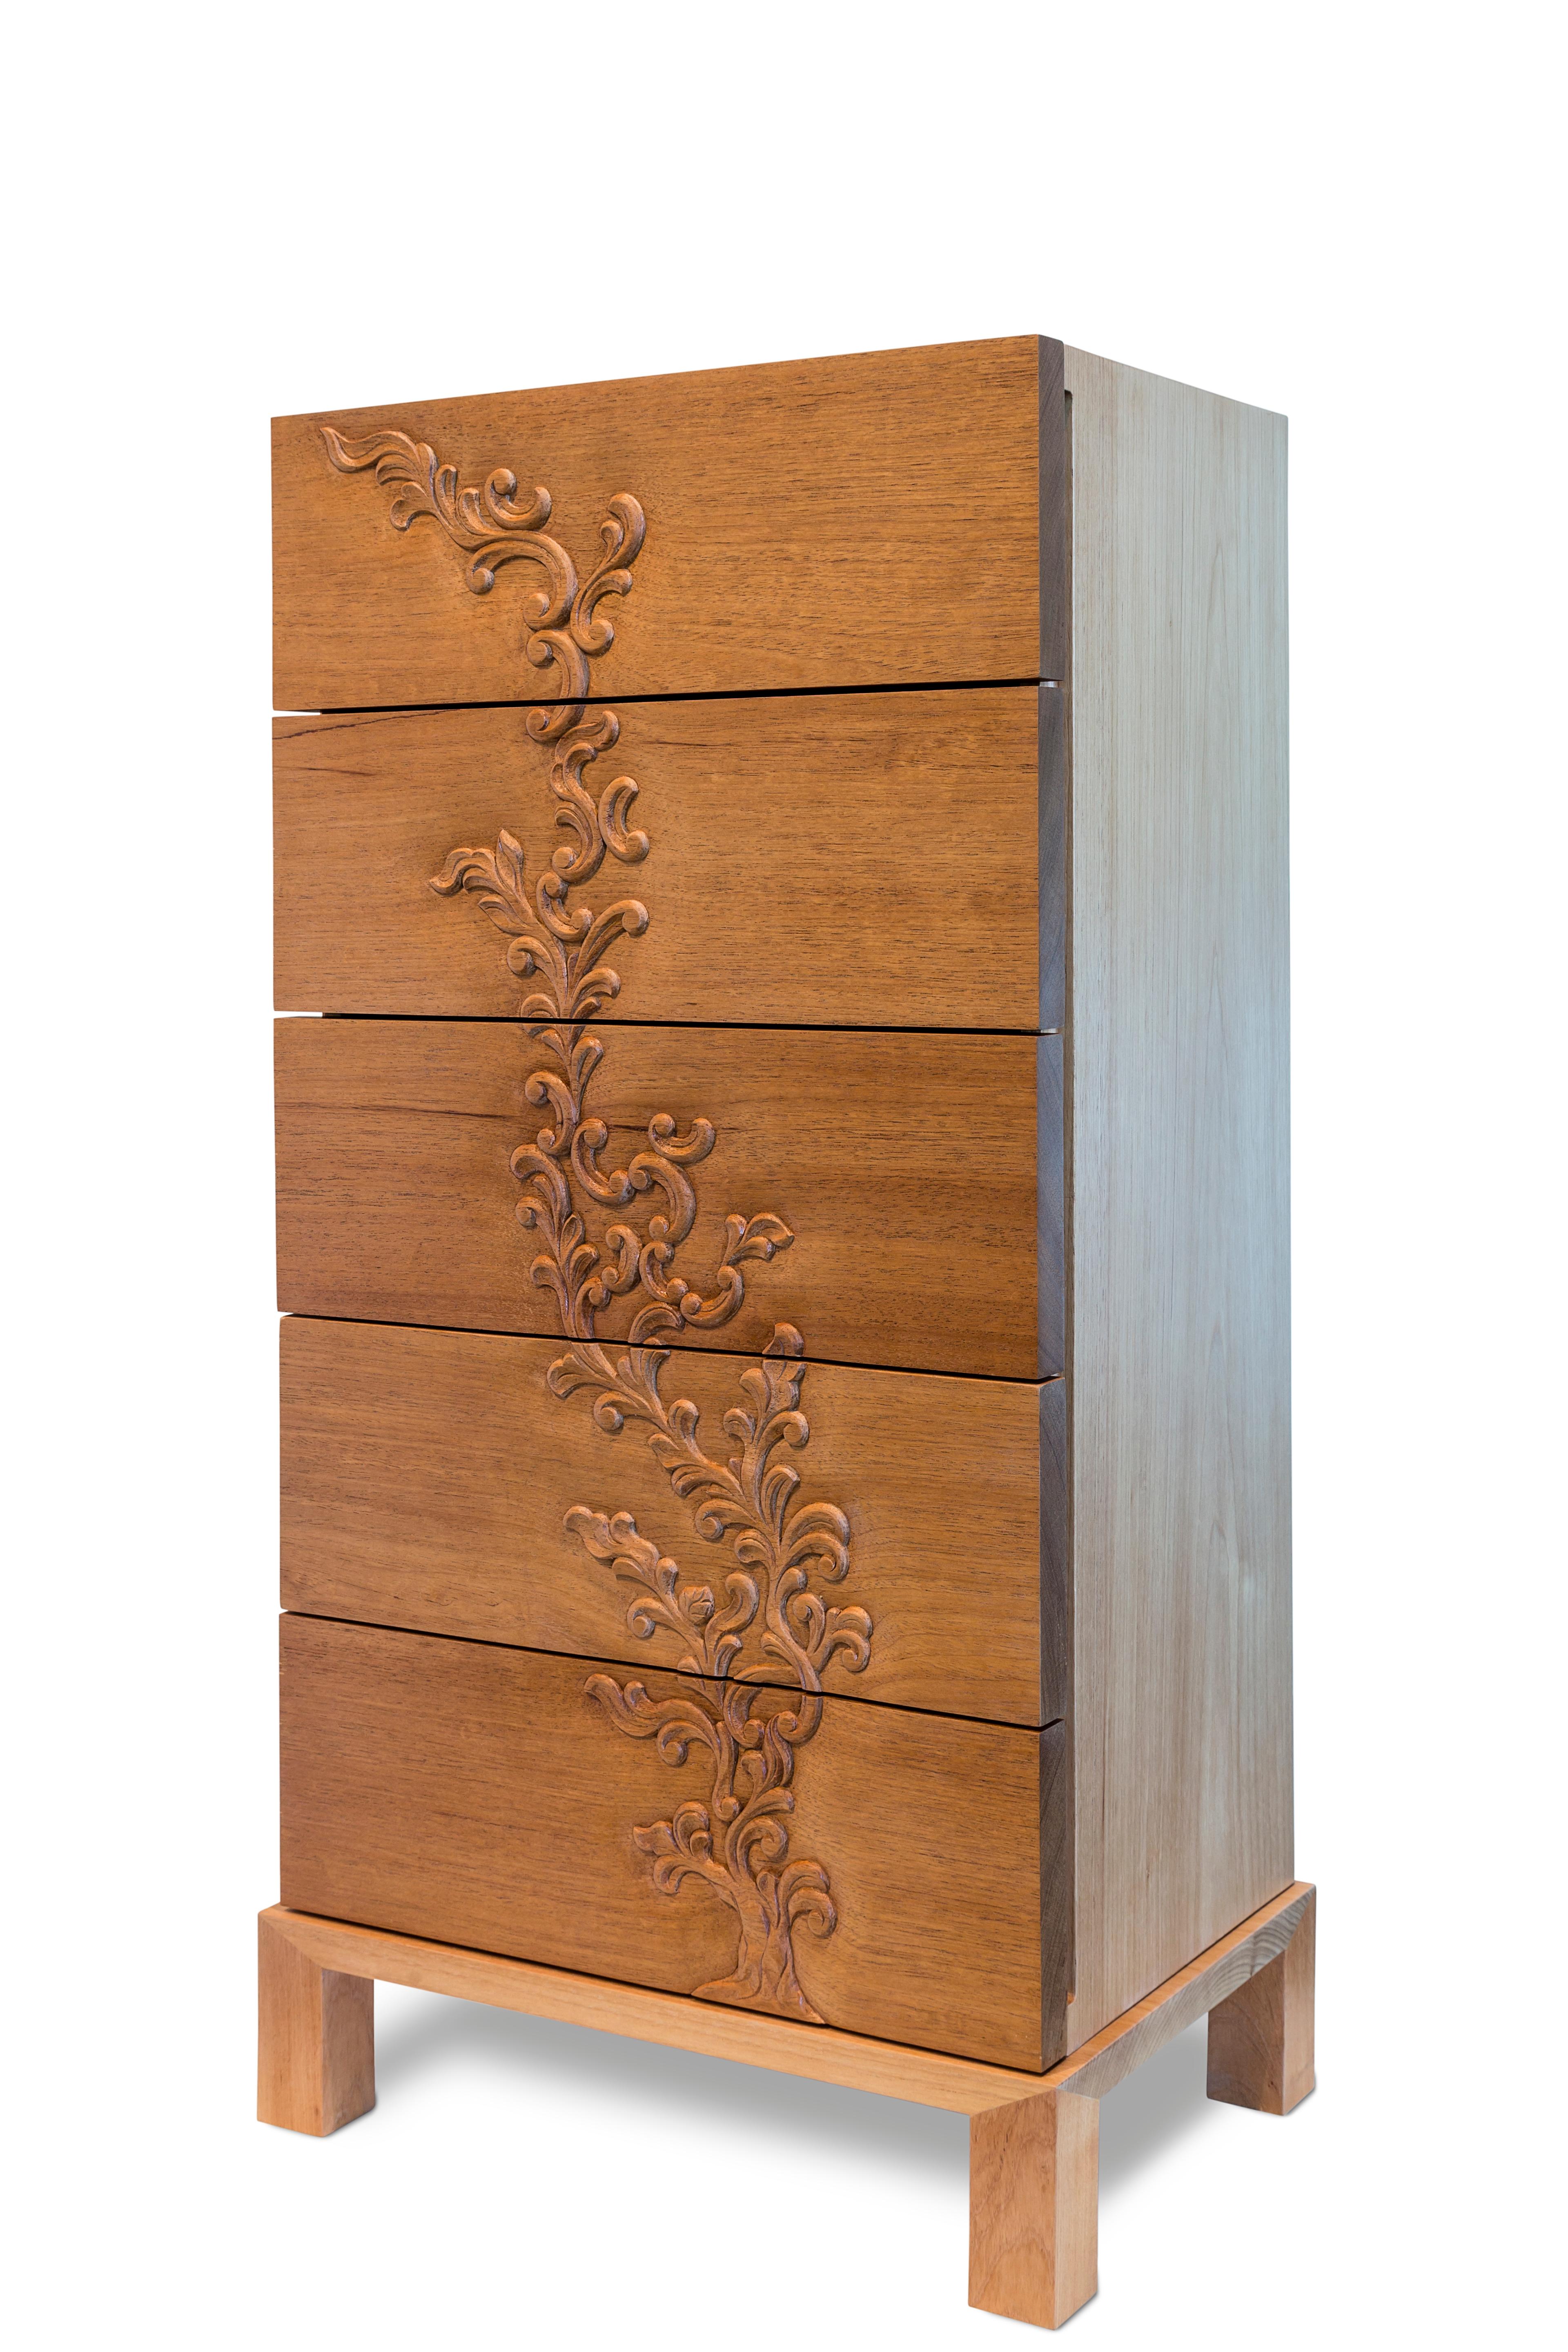 This chest of drawers is made in solid pink cedar wood carved by the craftsman Rondinelly Santos, specialized in sacred art.

The flowing design of the acanthus scrolls and leaves comes alive through the notch and runs through the five drawers of